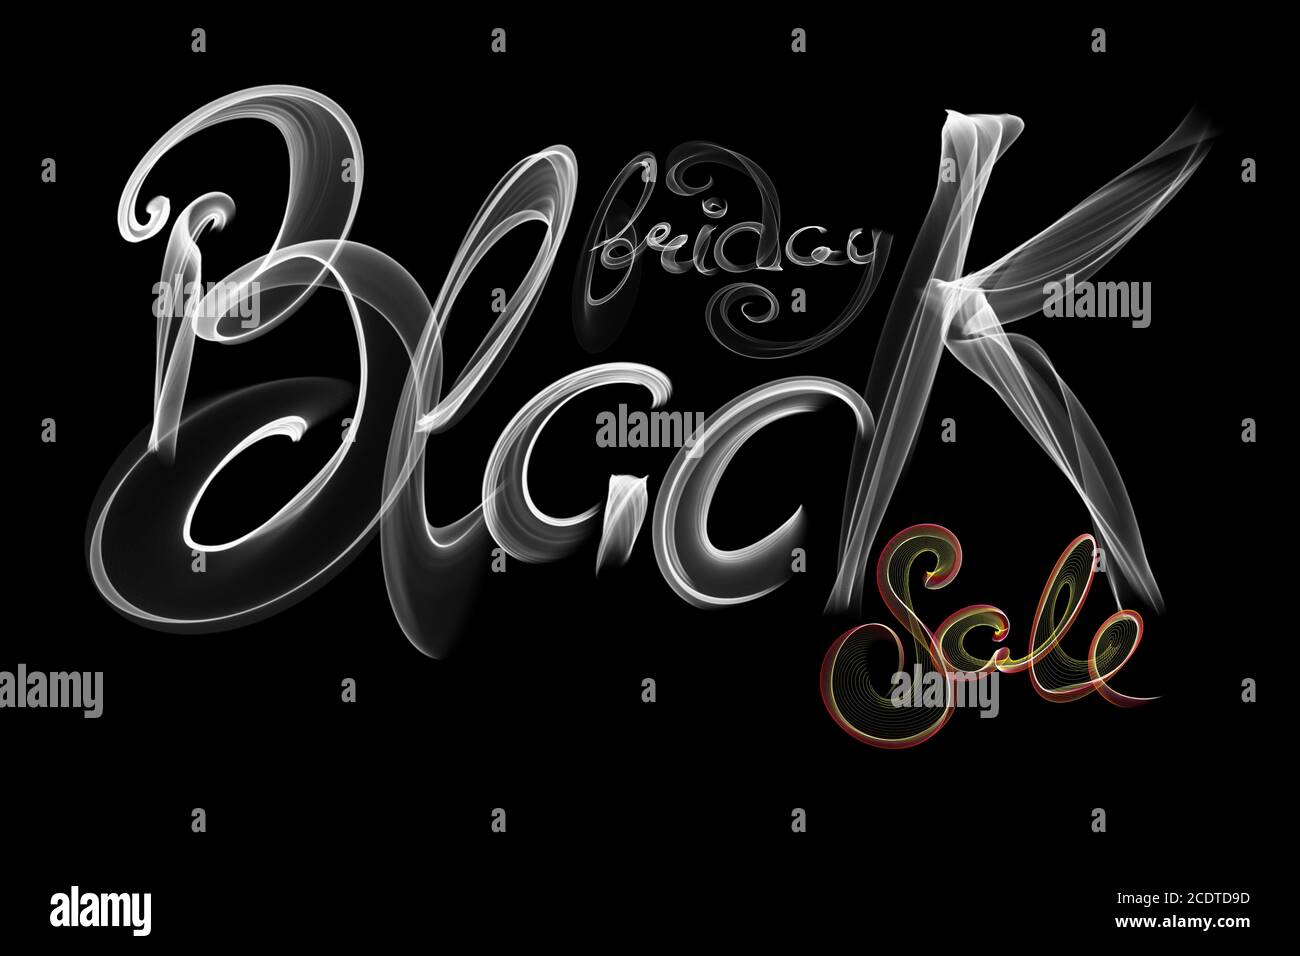 Black Friday Sale handmade lettering, calligraphy made wit fire, grunge texture and light background for logo, banners, labels, Stock Photo